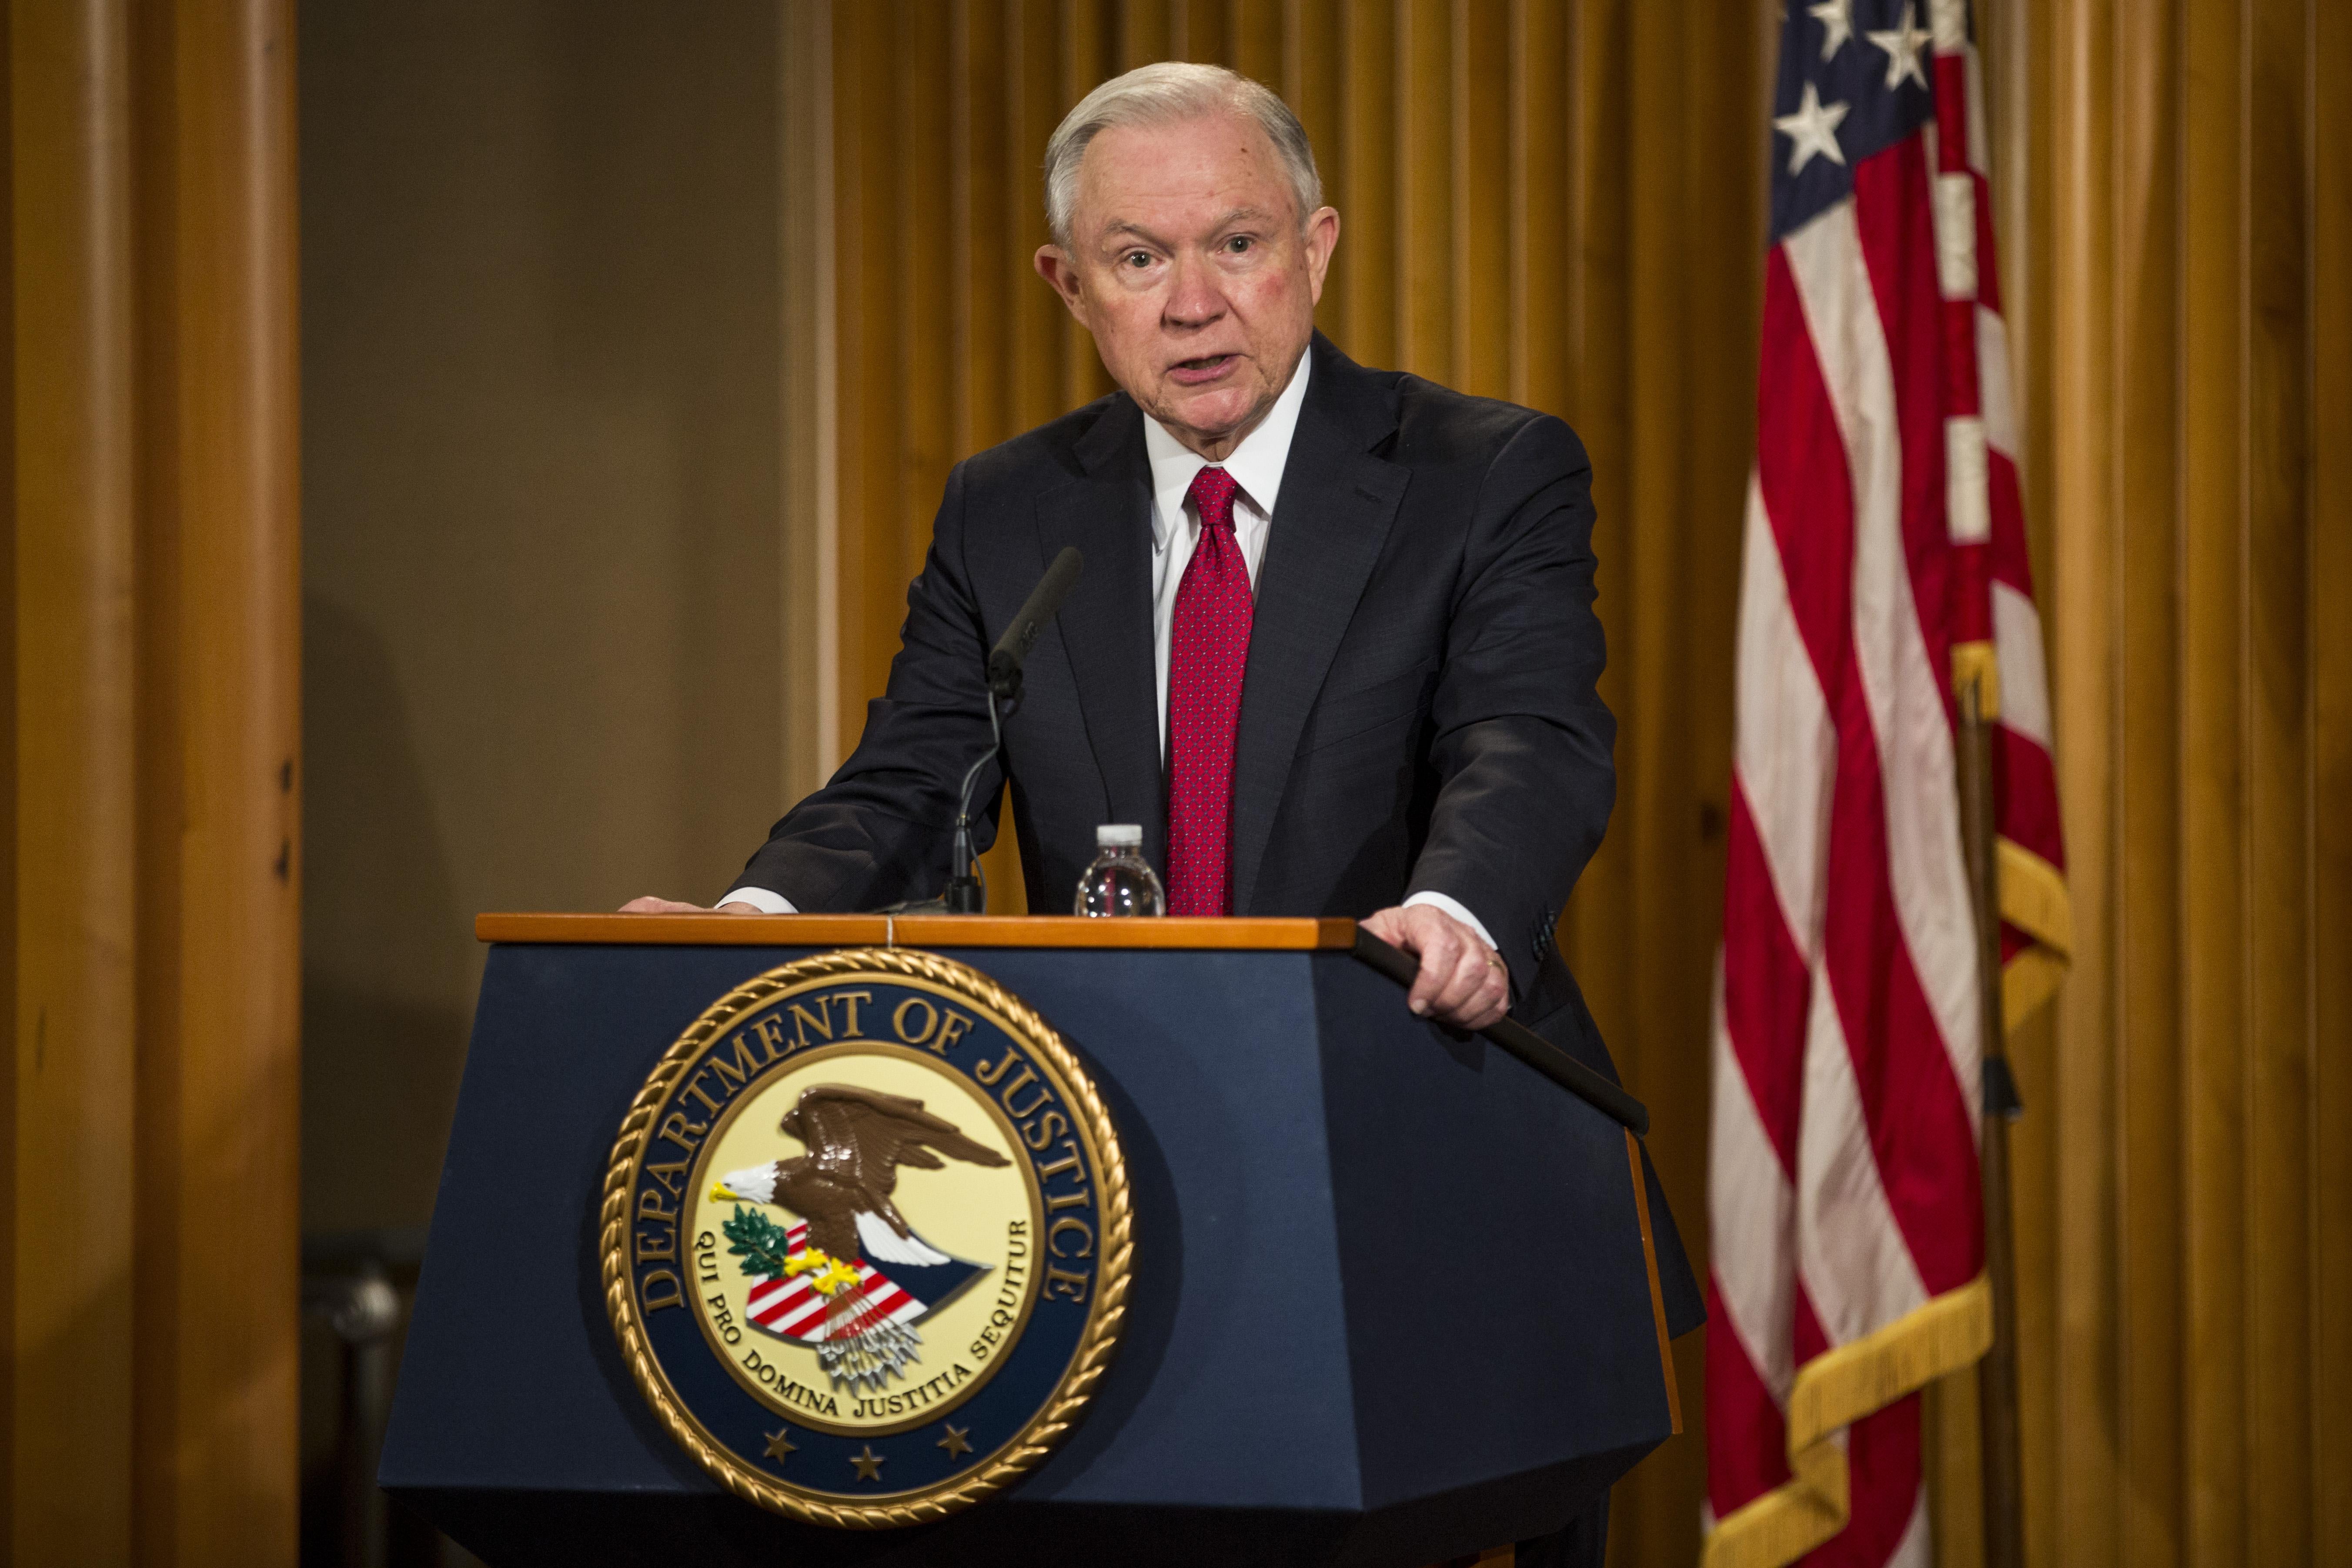 Attorney General Jeff Sessions delivers remarks on Feb. 28, 2017, in Washington.